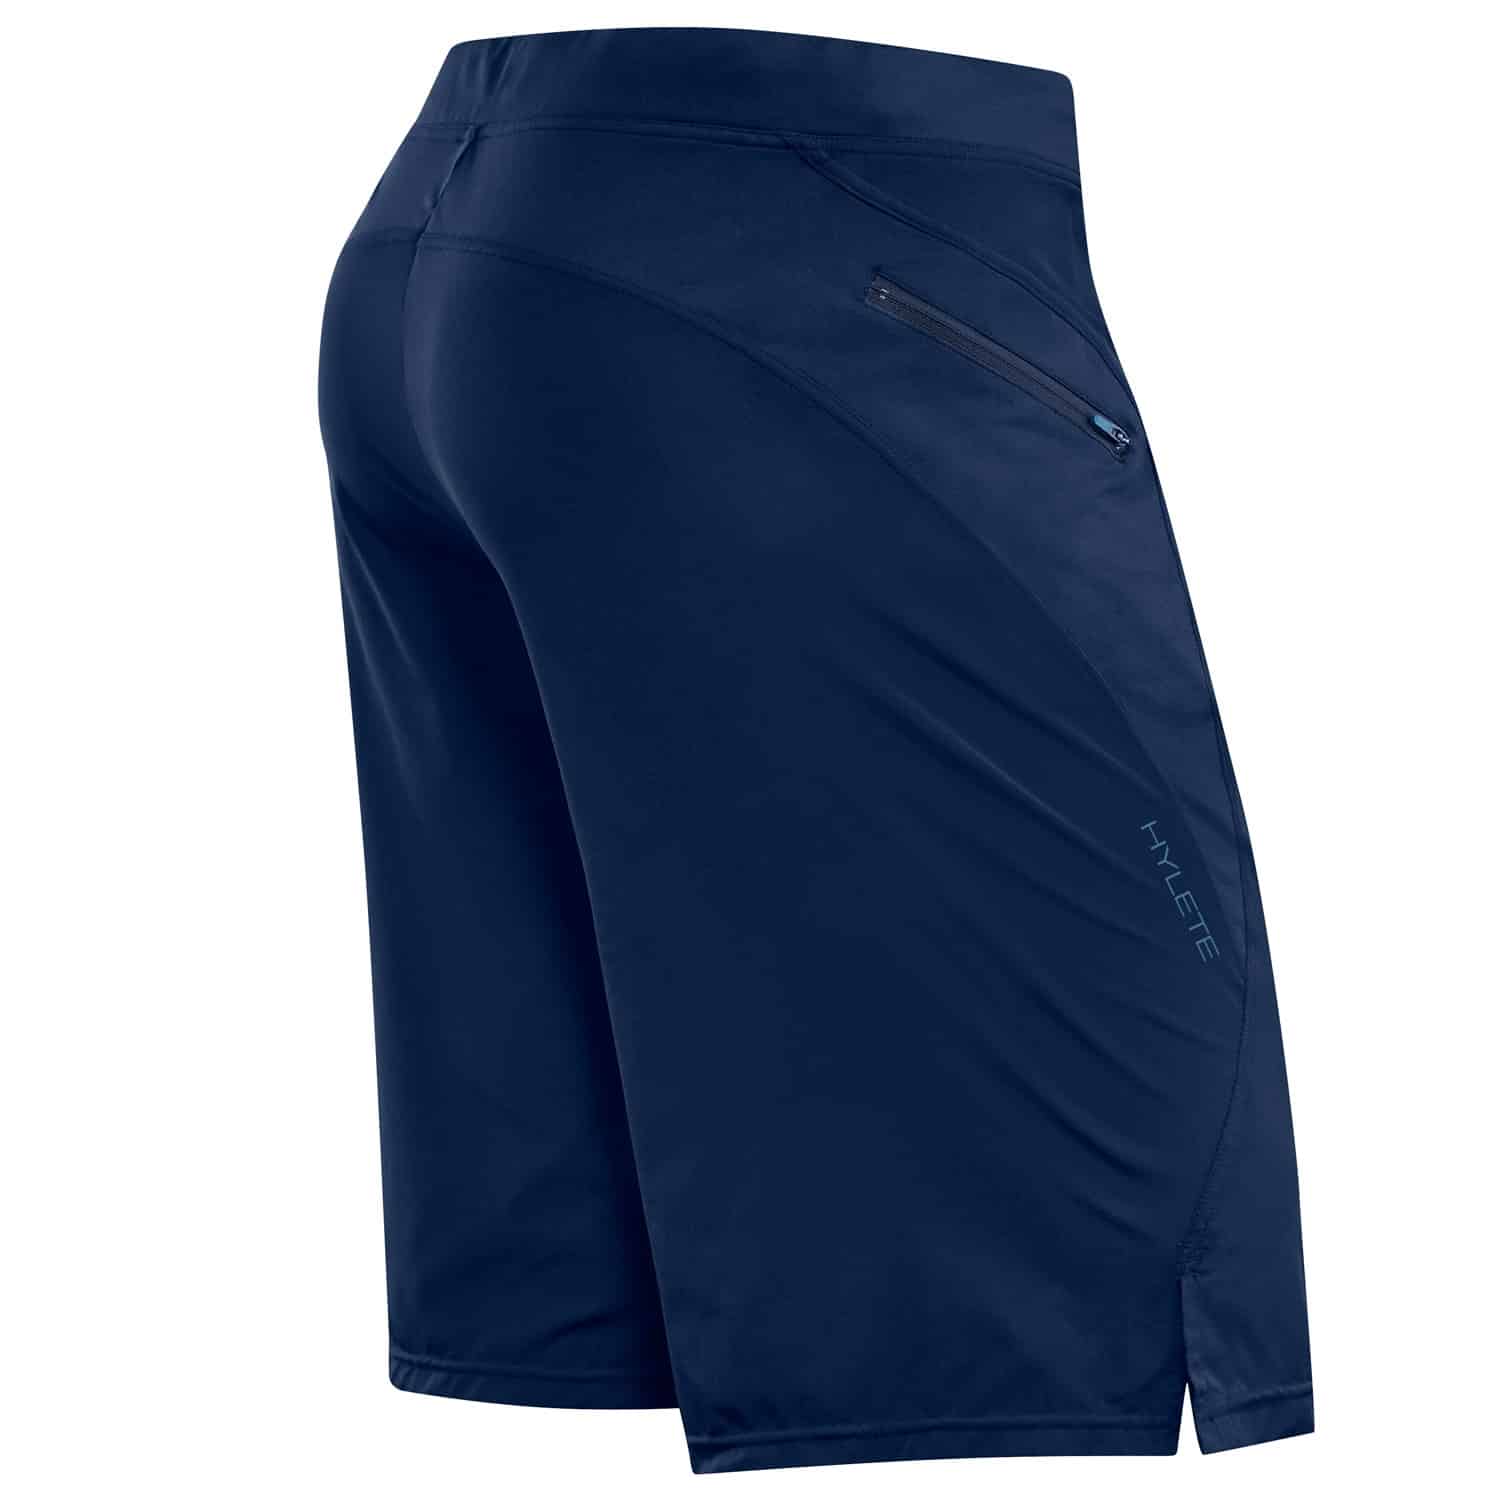 Men's Workout Shorts Review - Verge II from Hylete - Cross Train Clothes